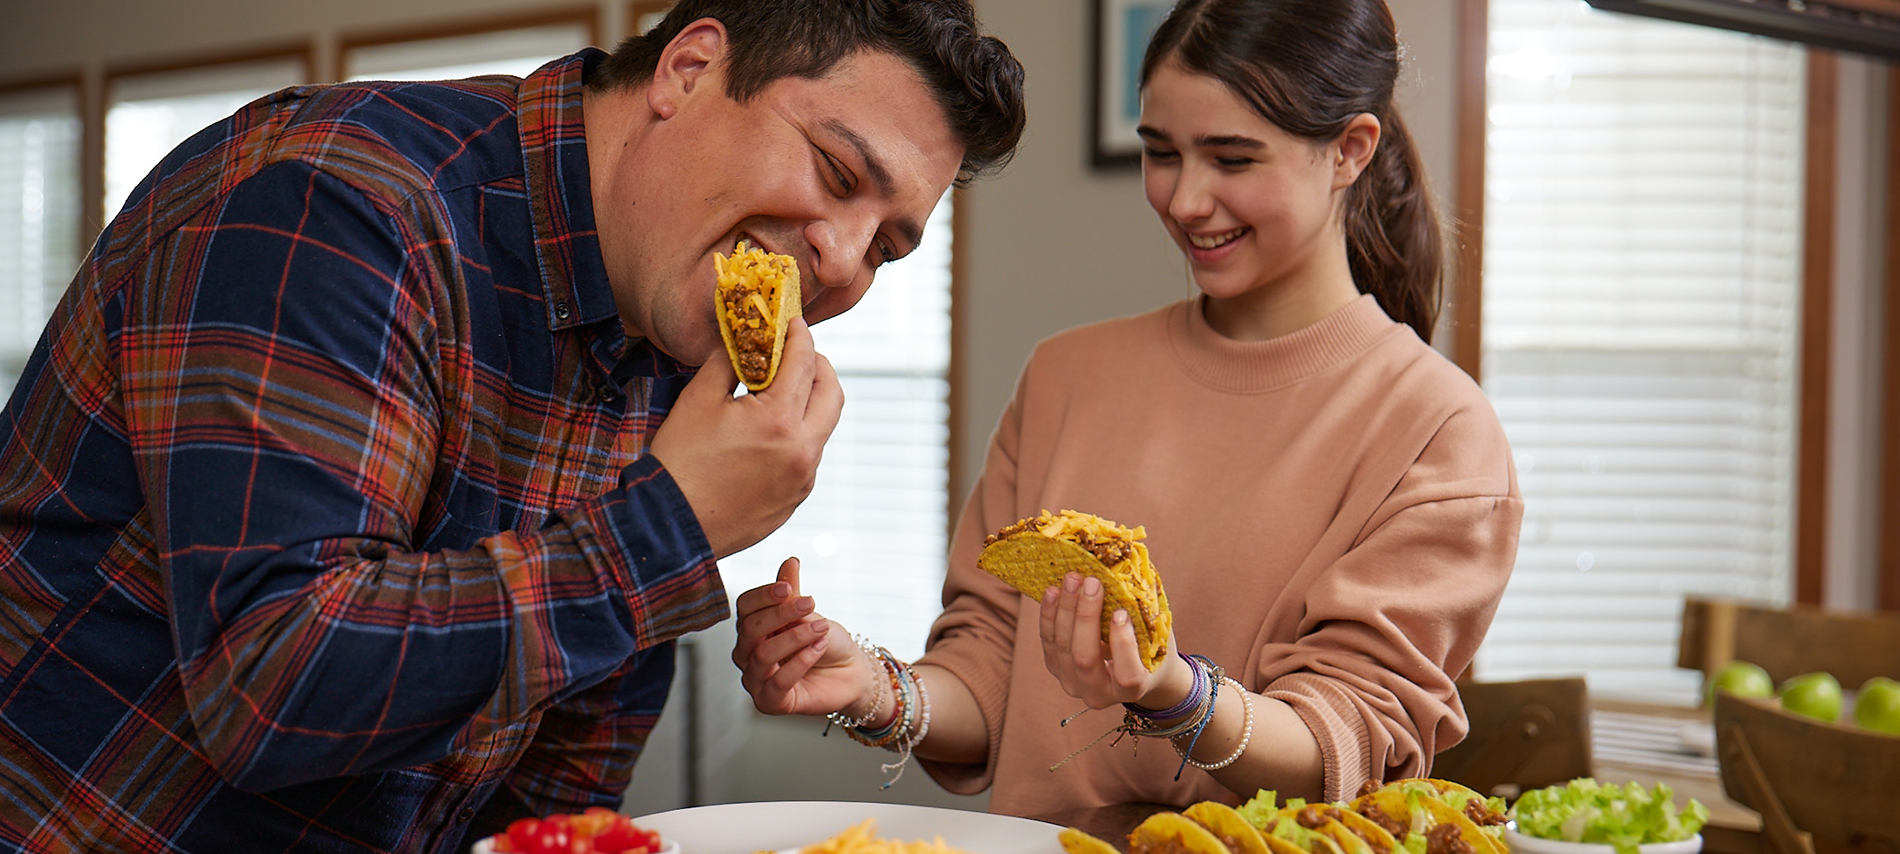 father and daughter eating tacos together in their kitchen, with taco ingredients and cheese prepared on the counter